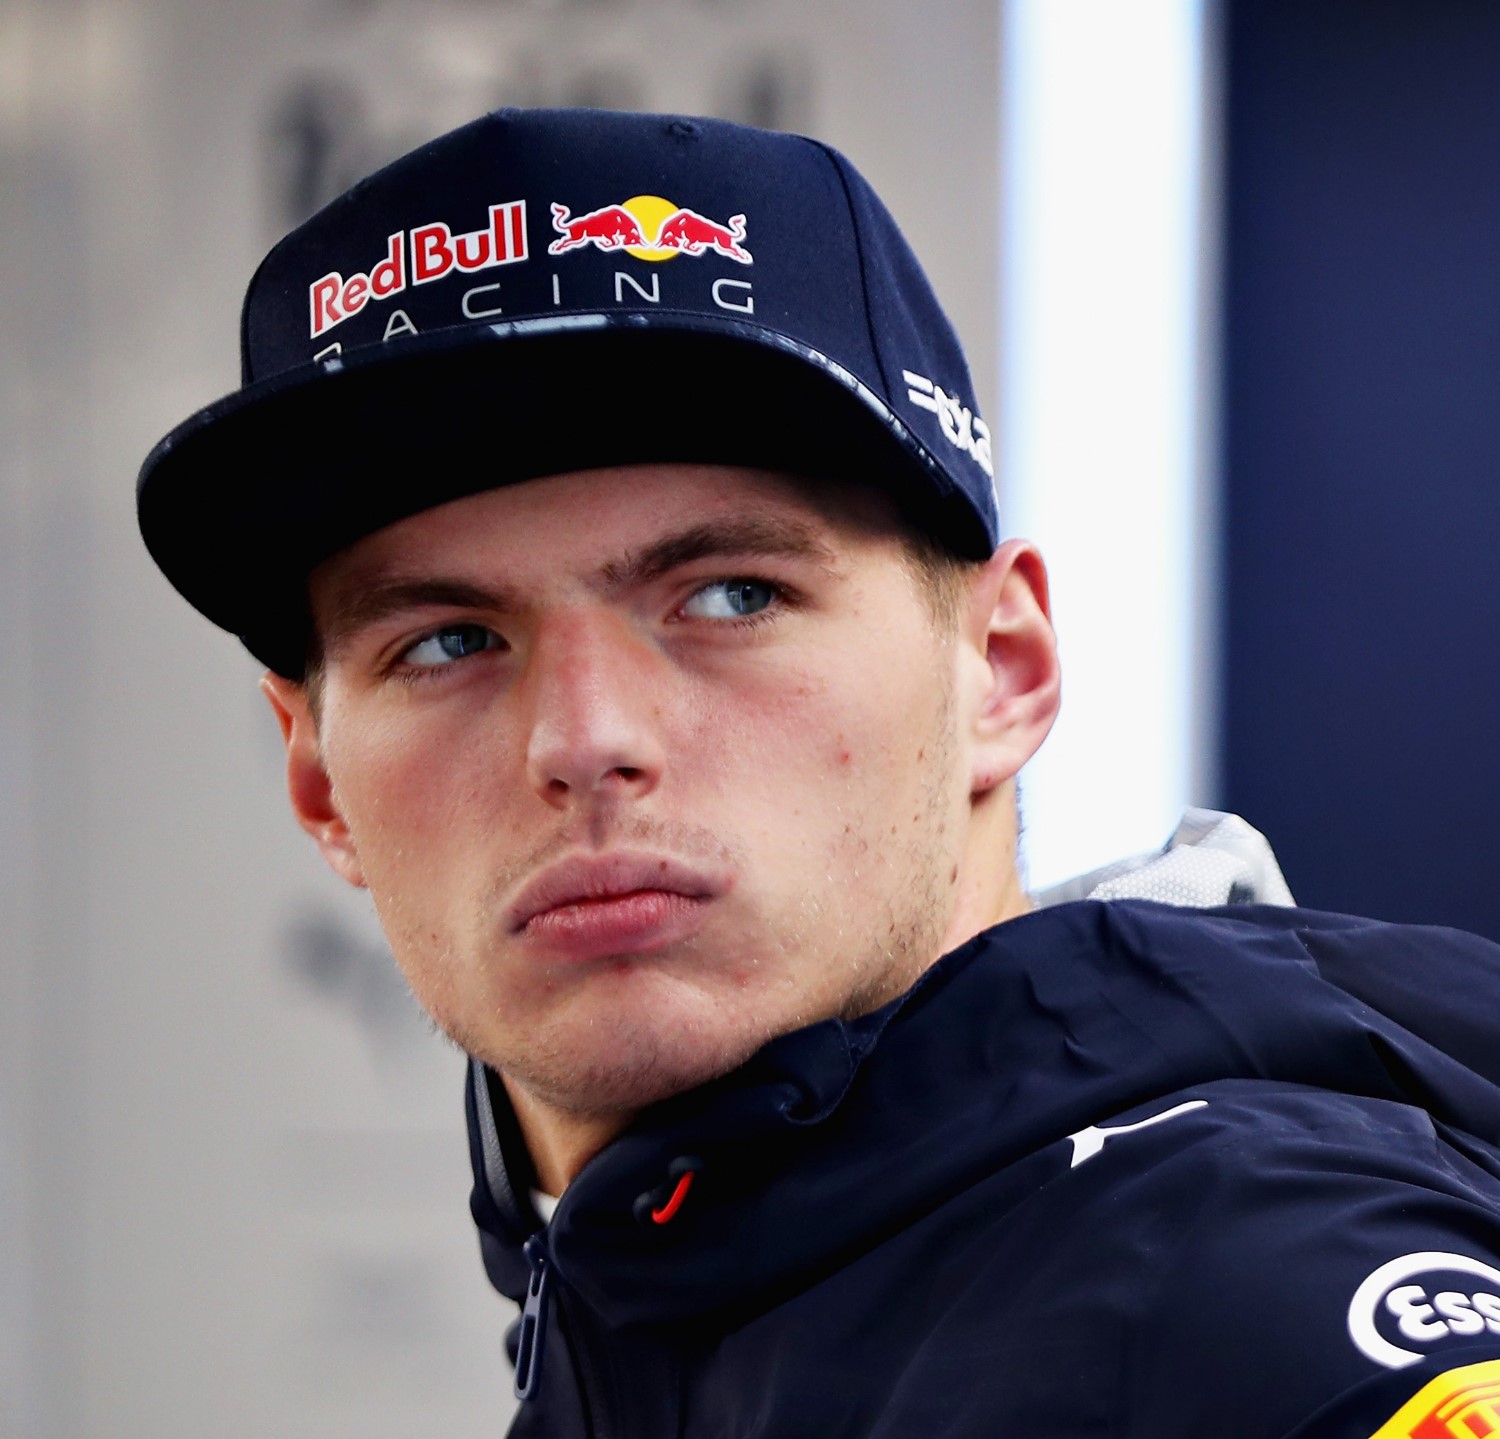 Verstappen has to come to terms with the fact he is a flawed driver